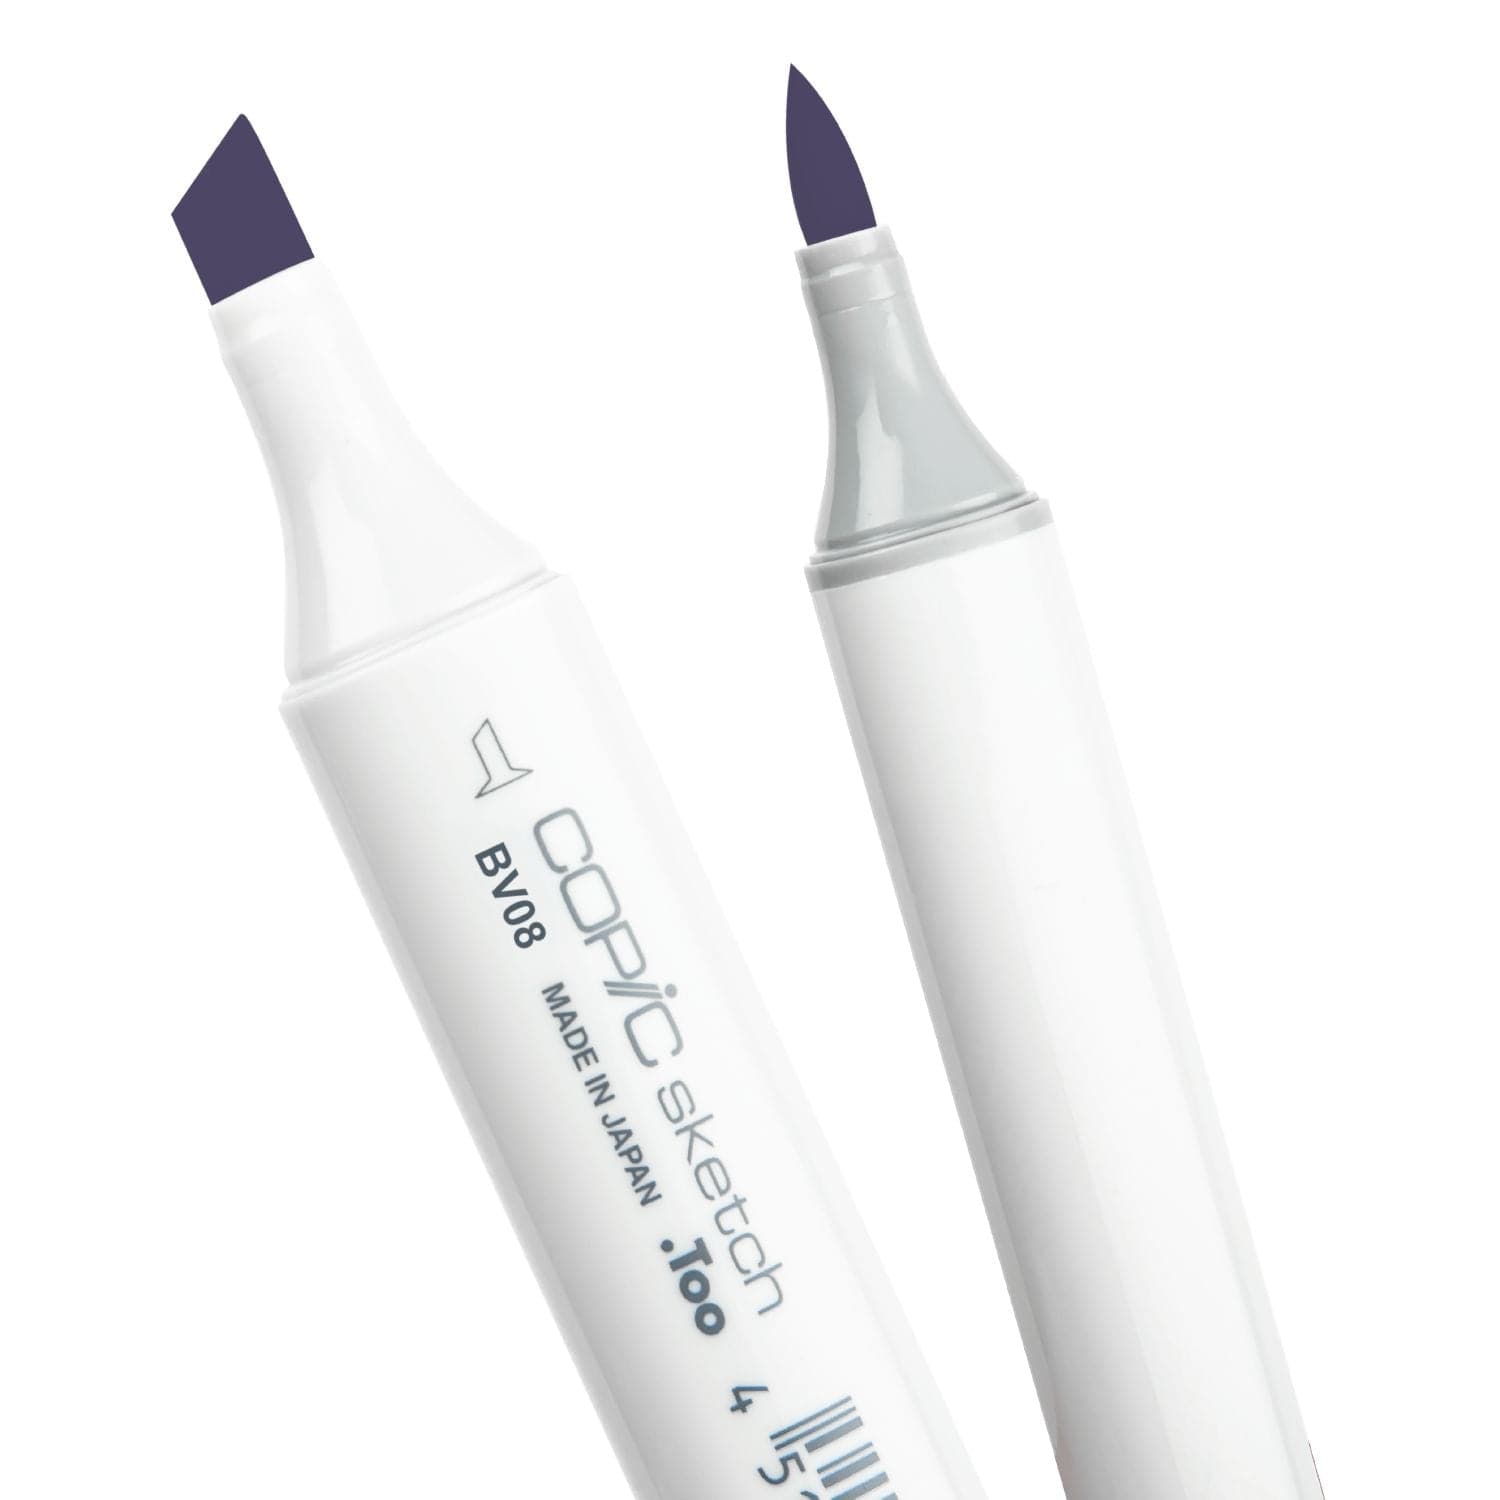 https://www.shopriot.shop/wp-content/uploads/1689/04/copic-sketch-marker-blue-violet-bv08-copic-experience-excellence_0.jpg